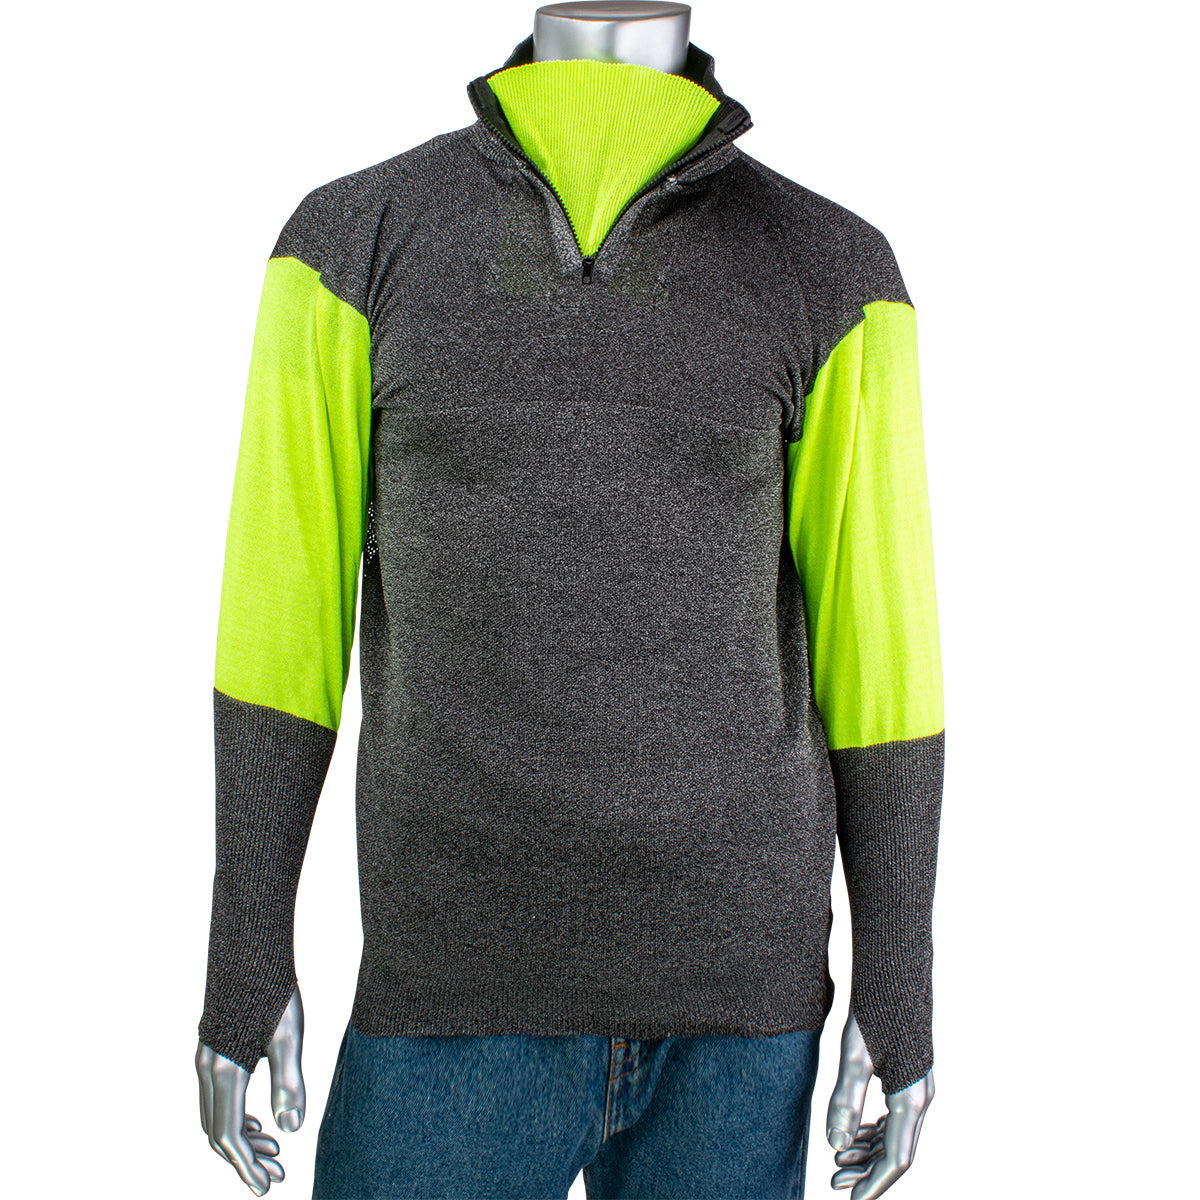 PIP PJG145-3CM-HVB-TH-3XL ATA Blended Cut Resistant 1/4 Zip Pullover with Hi-Vis Sleeves and Thumb Holes